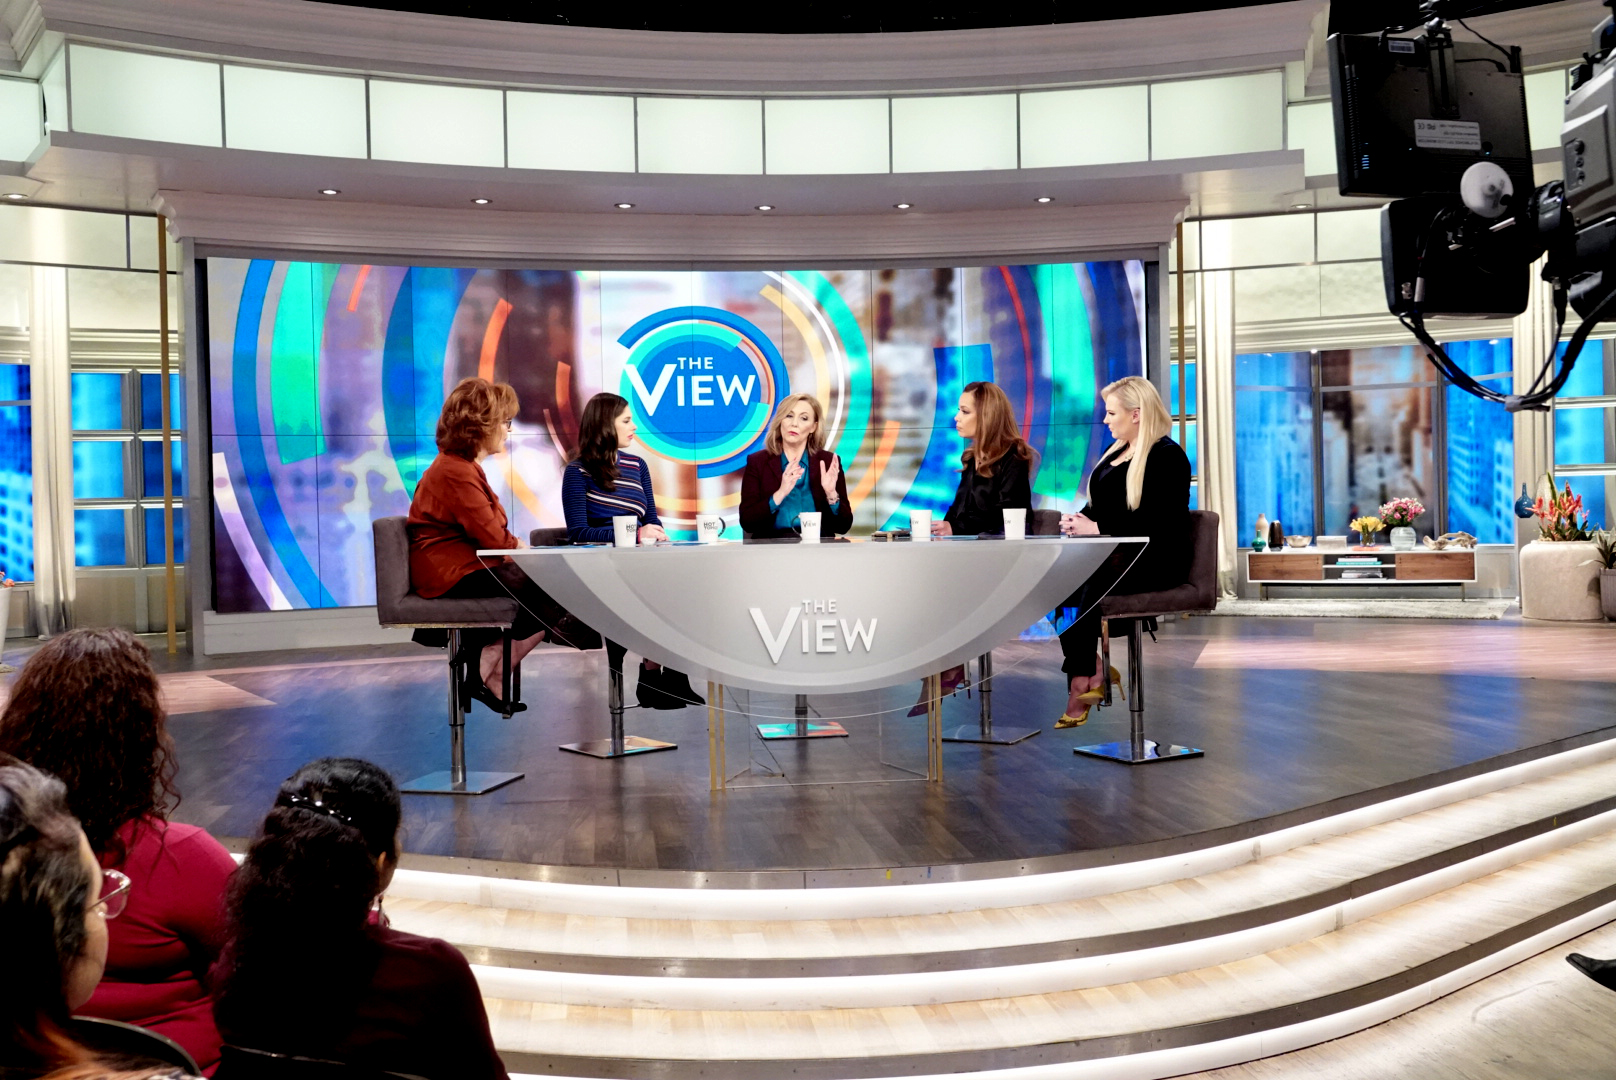 PHOTO: Jen Broberg from "Abducted in Plain Sight" explains to "The View" co-hosts how Robert Birtchtold manipulated her her childhood and kidnappings, Feb. 25, 2019.